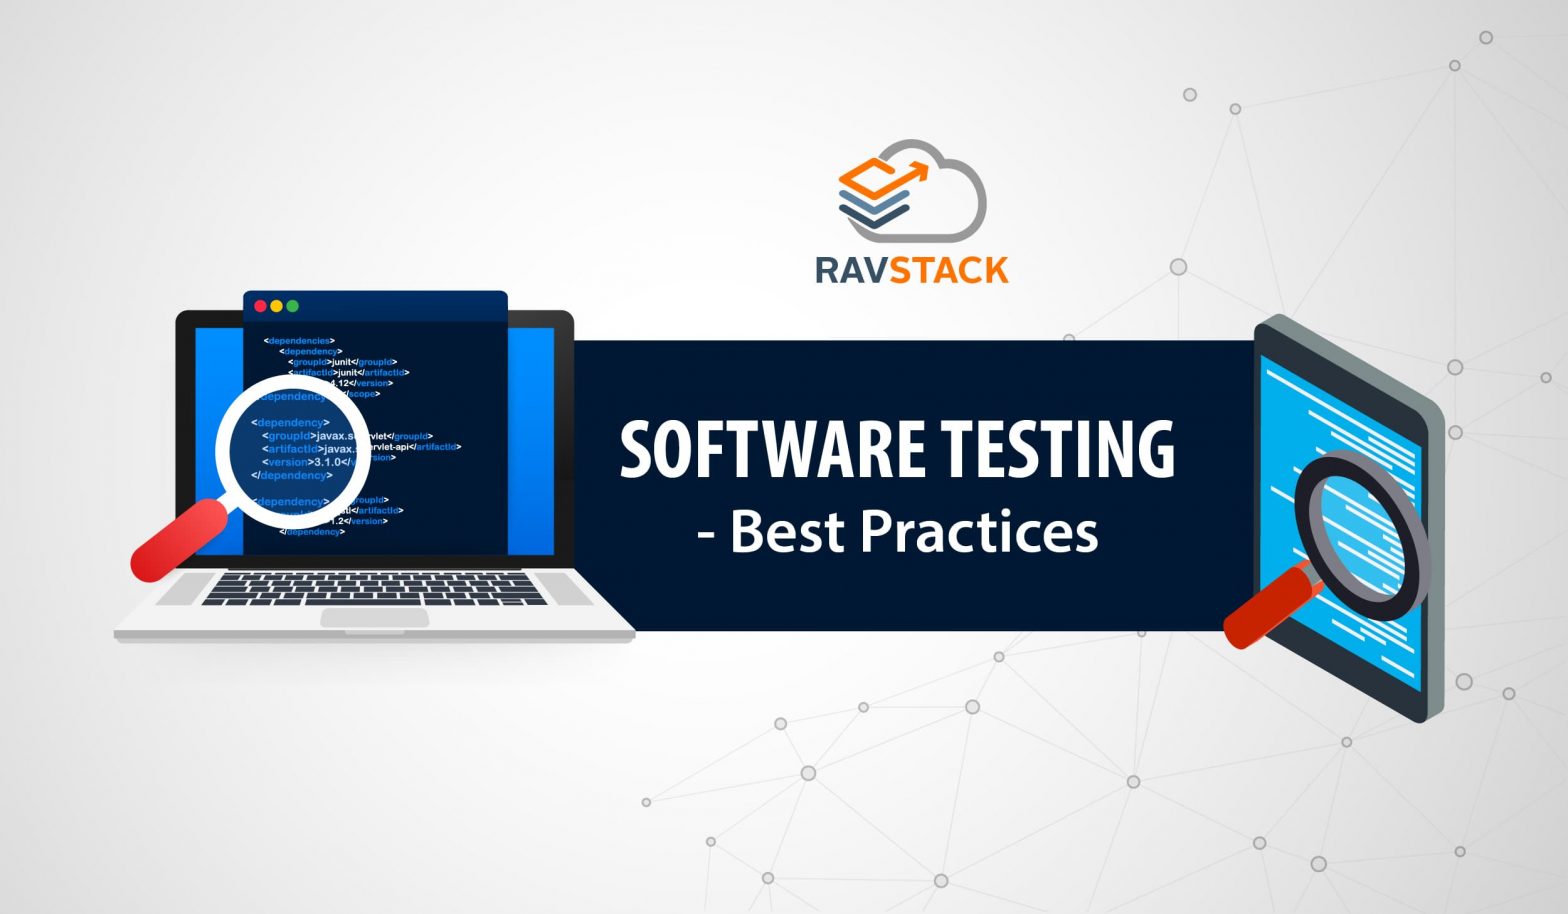 Software Testing best practices and solutions